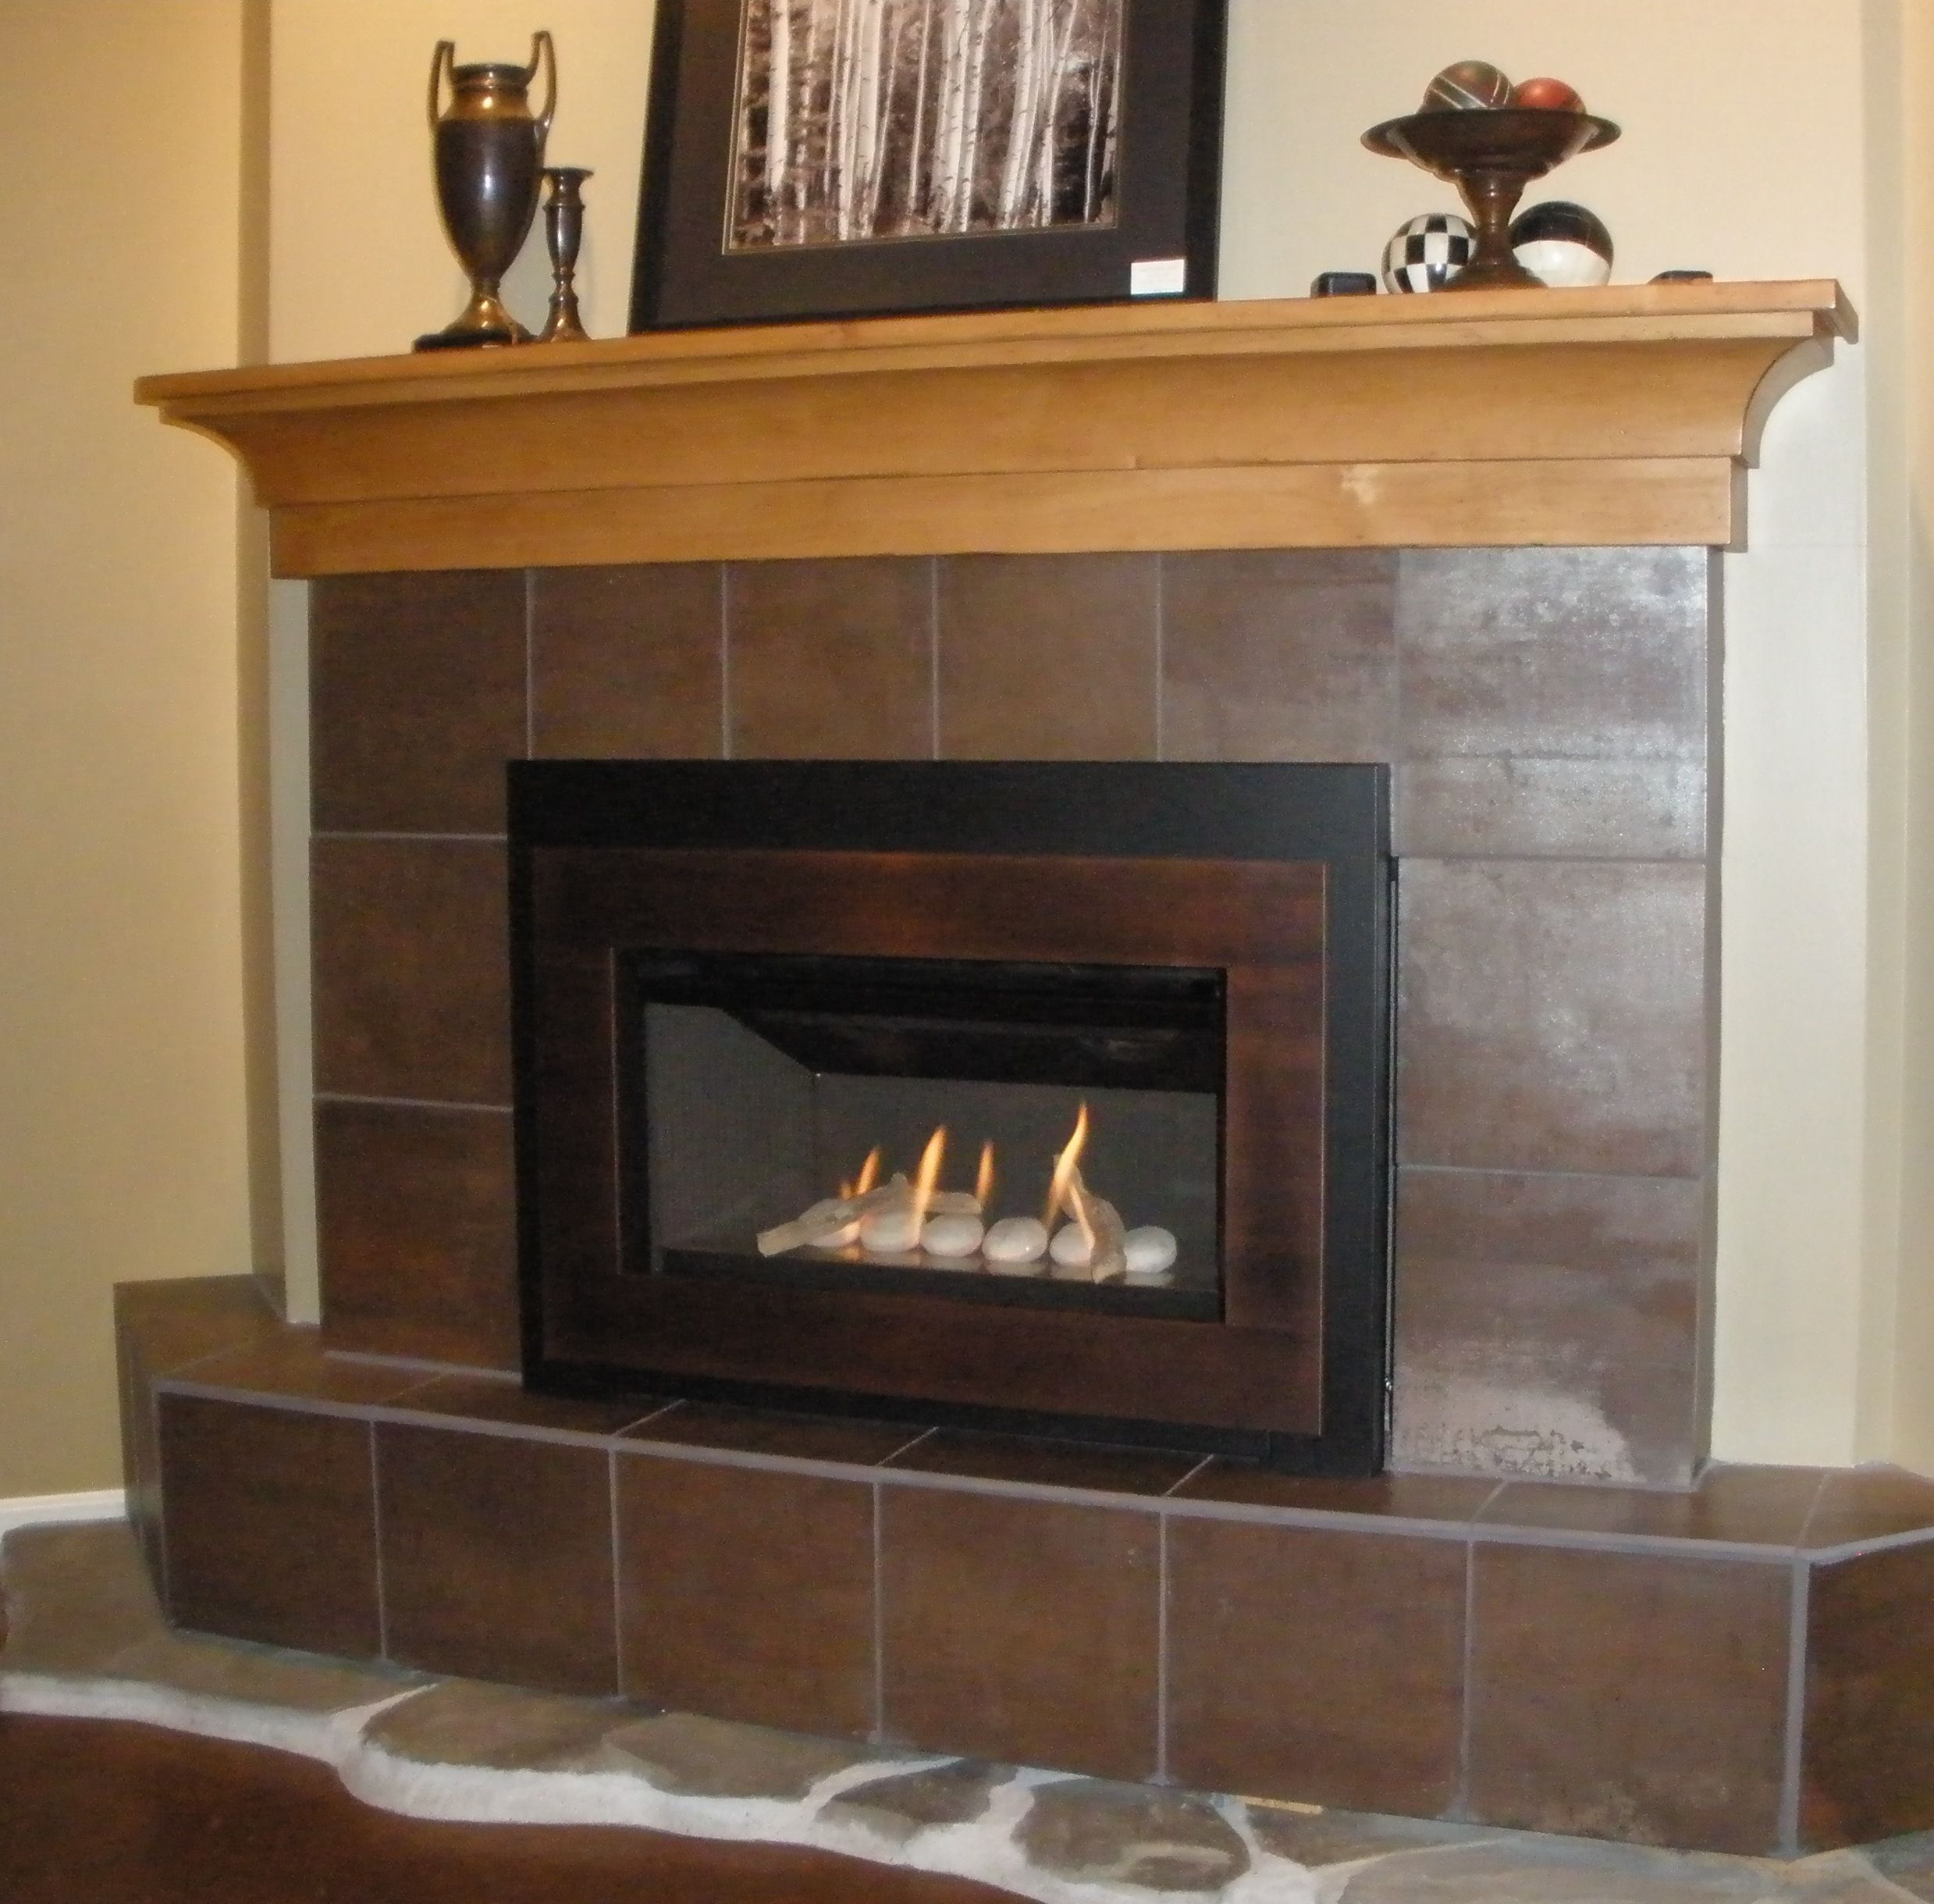 Vented Gas Fireplace with Blower Lovely Pin On Valor Radiant Gas Fireplaces Midwest Dealer